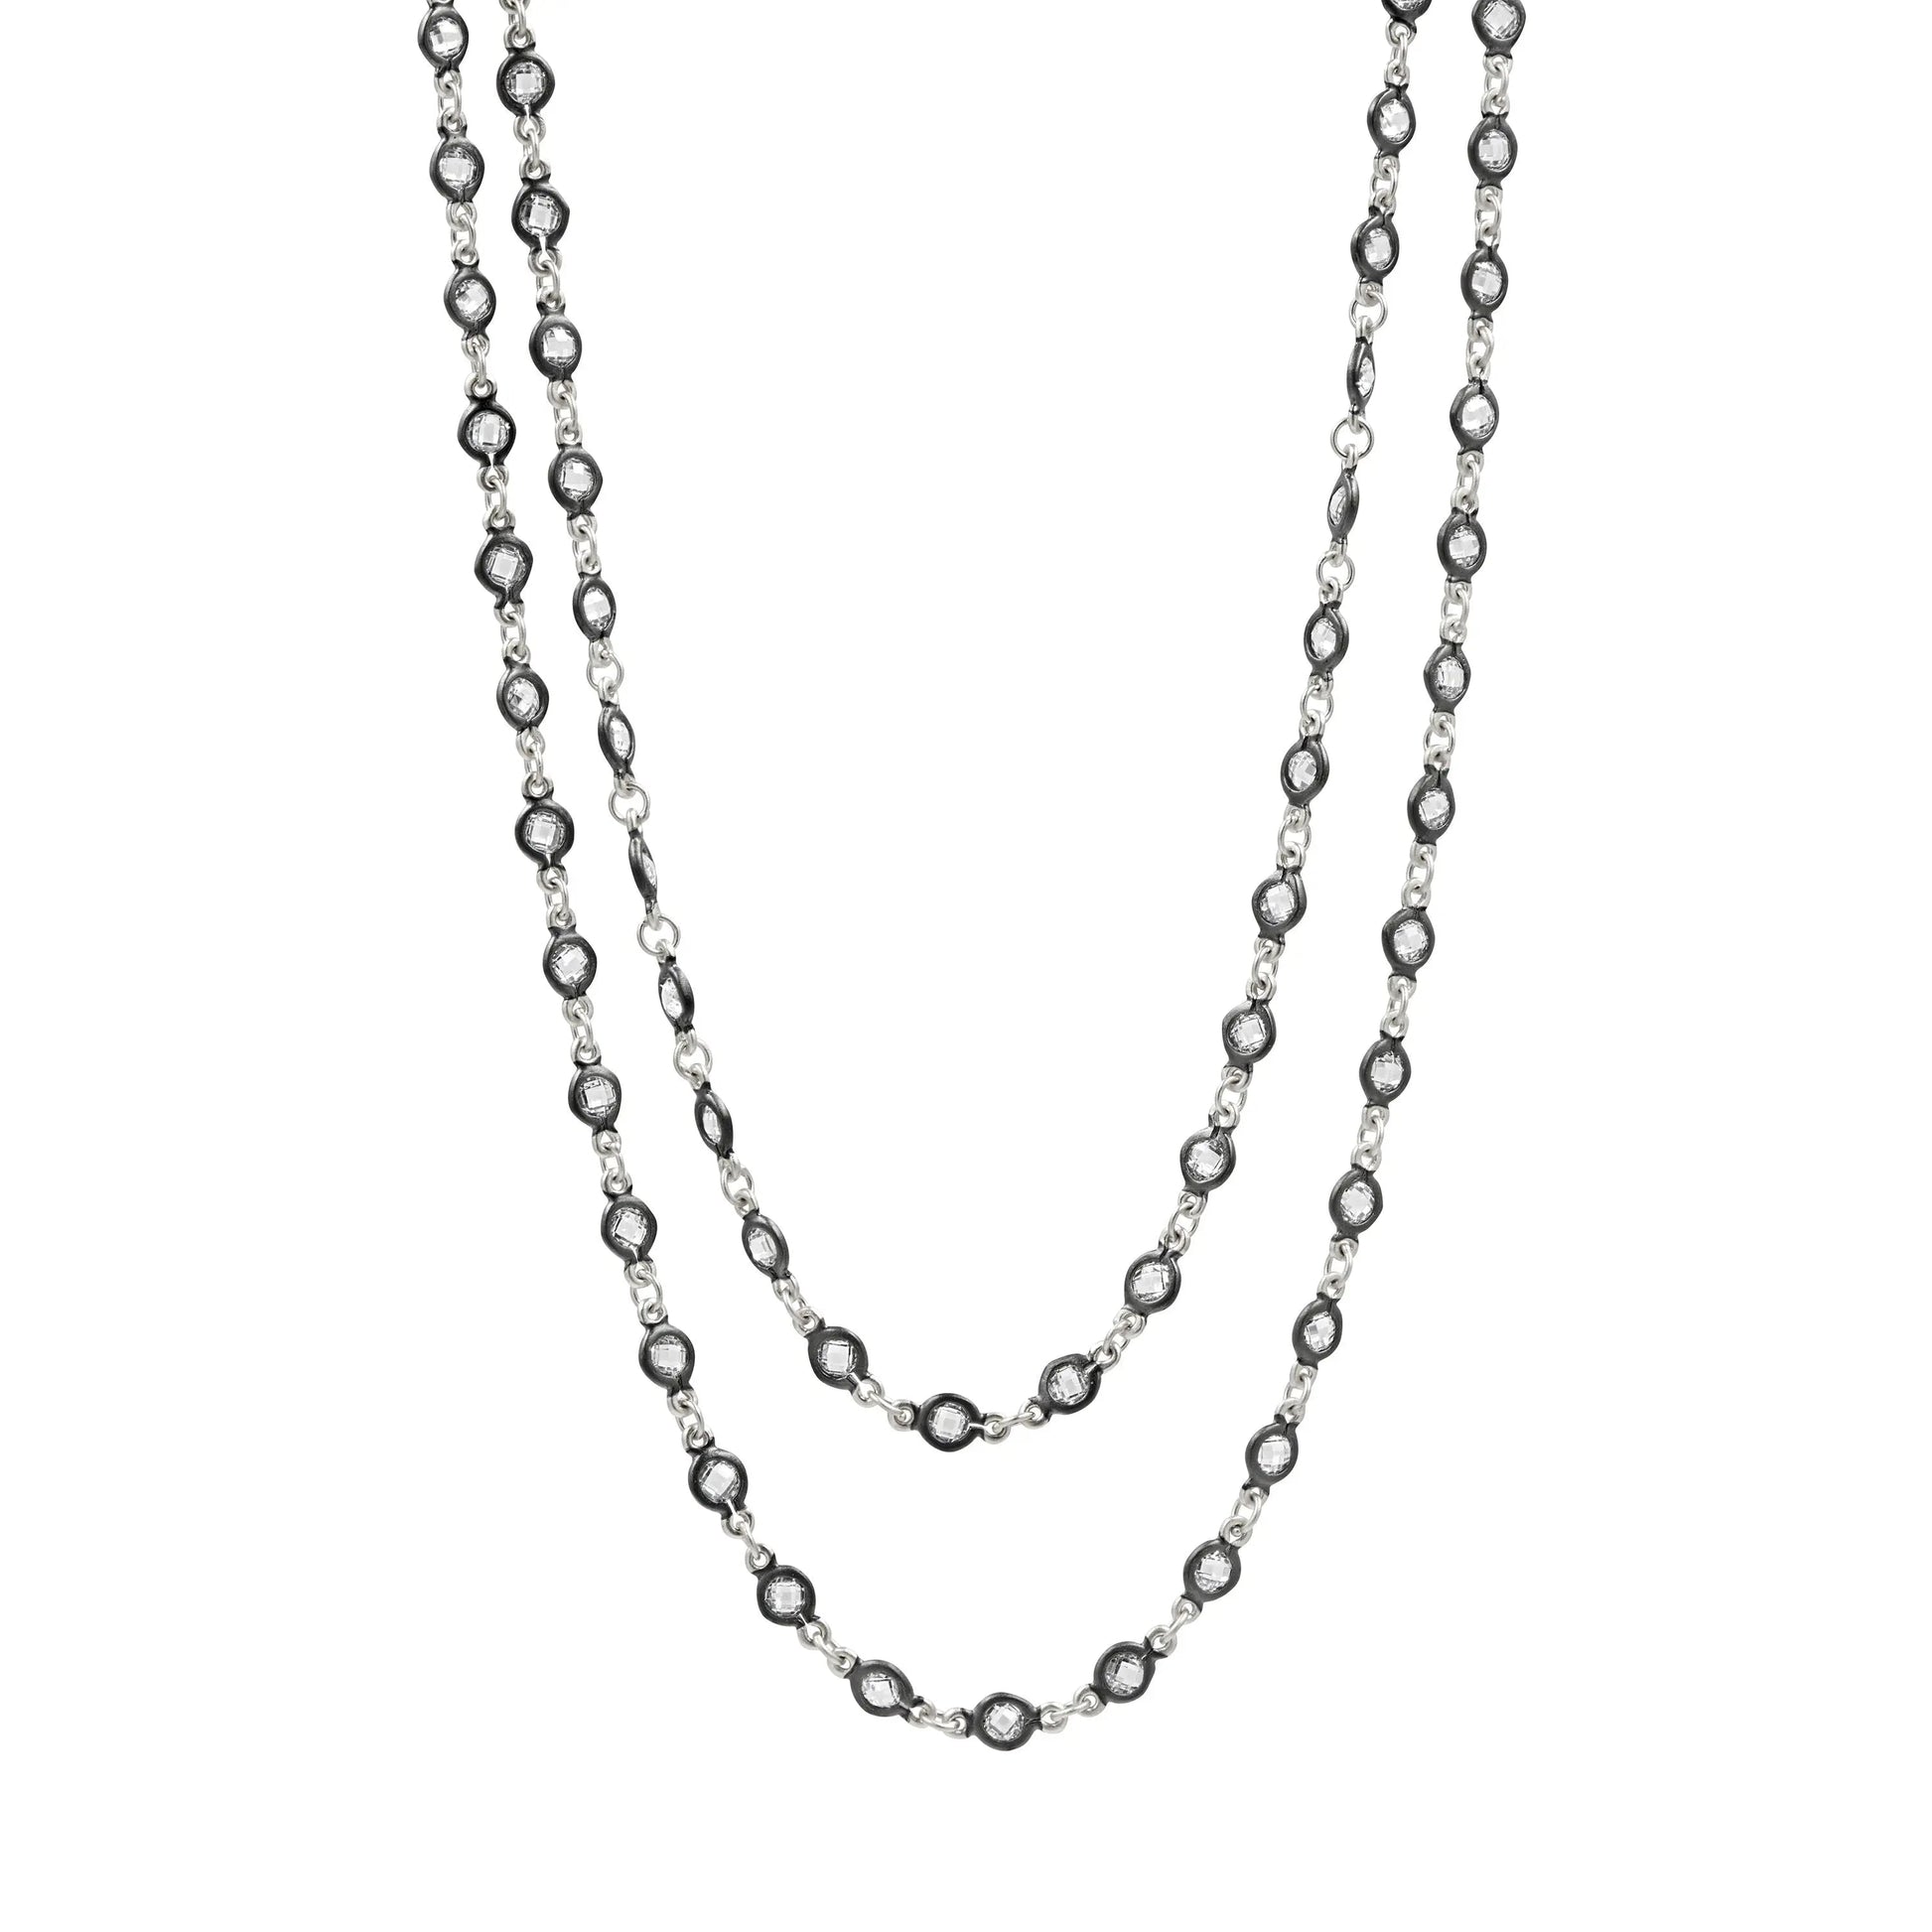 SilverBlack Faceted Stones Wrap Chain Necklace Signature NECKLACE